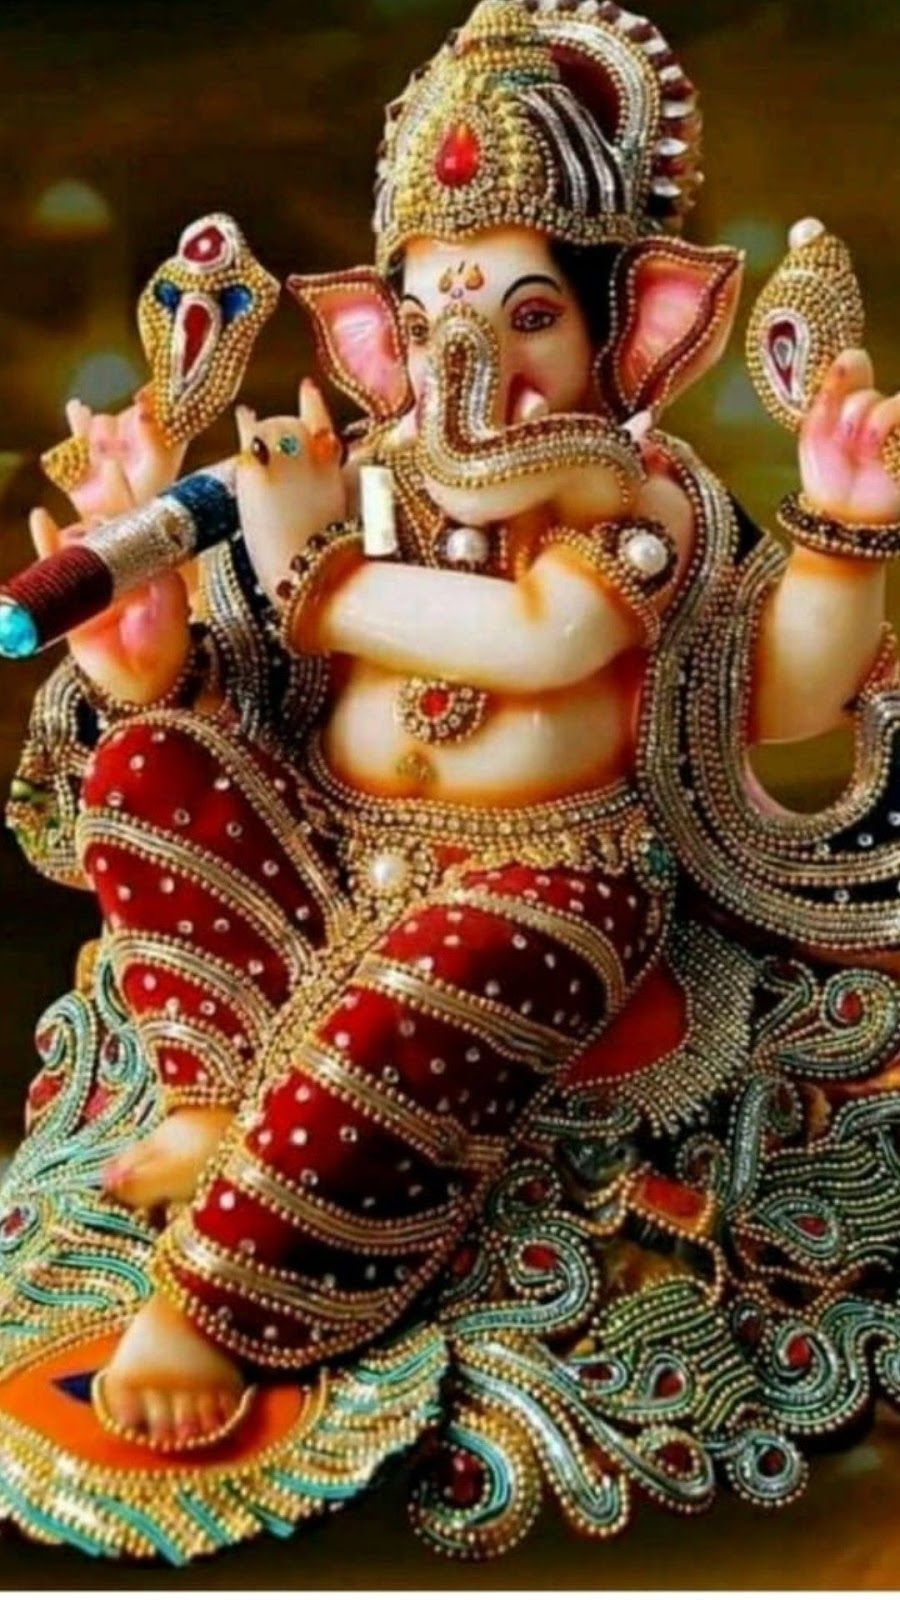 wallpics®Ganpati Bappa Wallpapers Glossy Photo Paper Poster For Living  Room,Bedroom,Office,Kids Room,Hall (13X19) : Amazon.in: Home & Kitchen